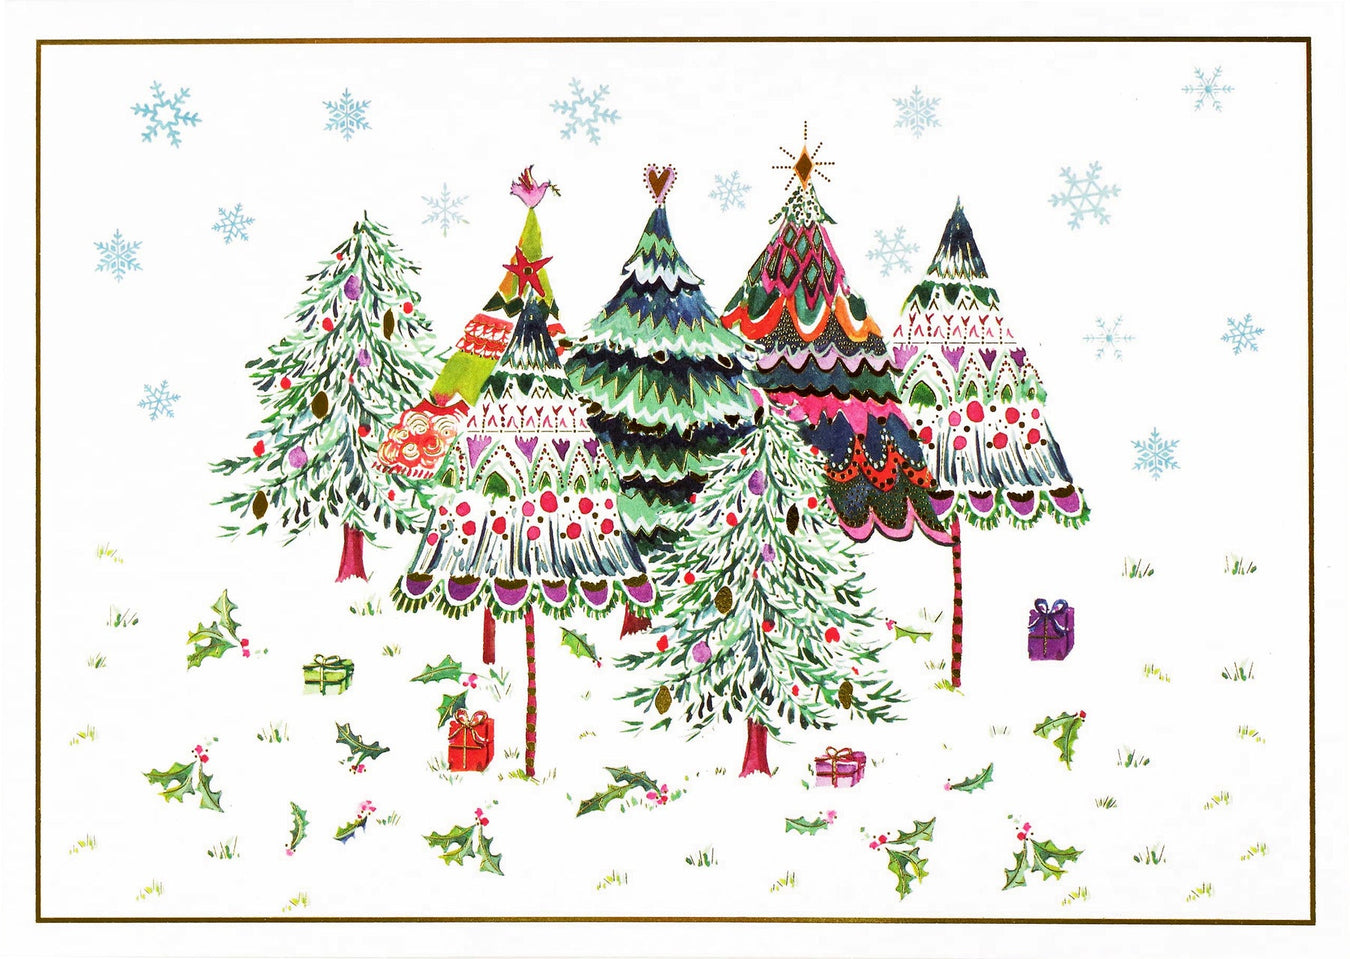 Stationery - Boxed Christmas Cards